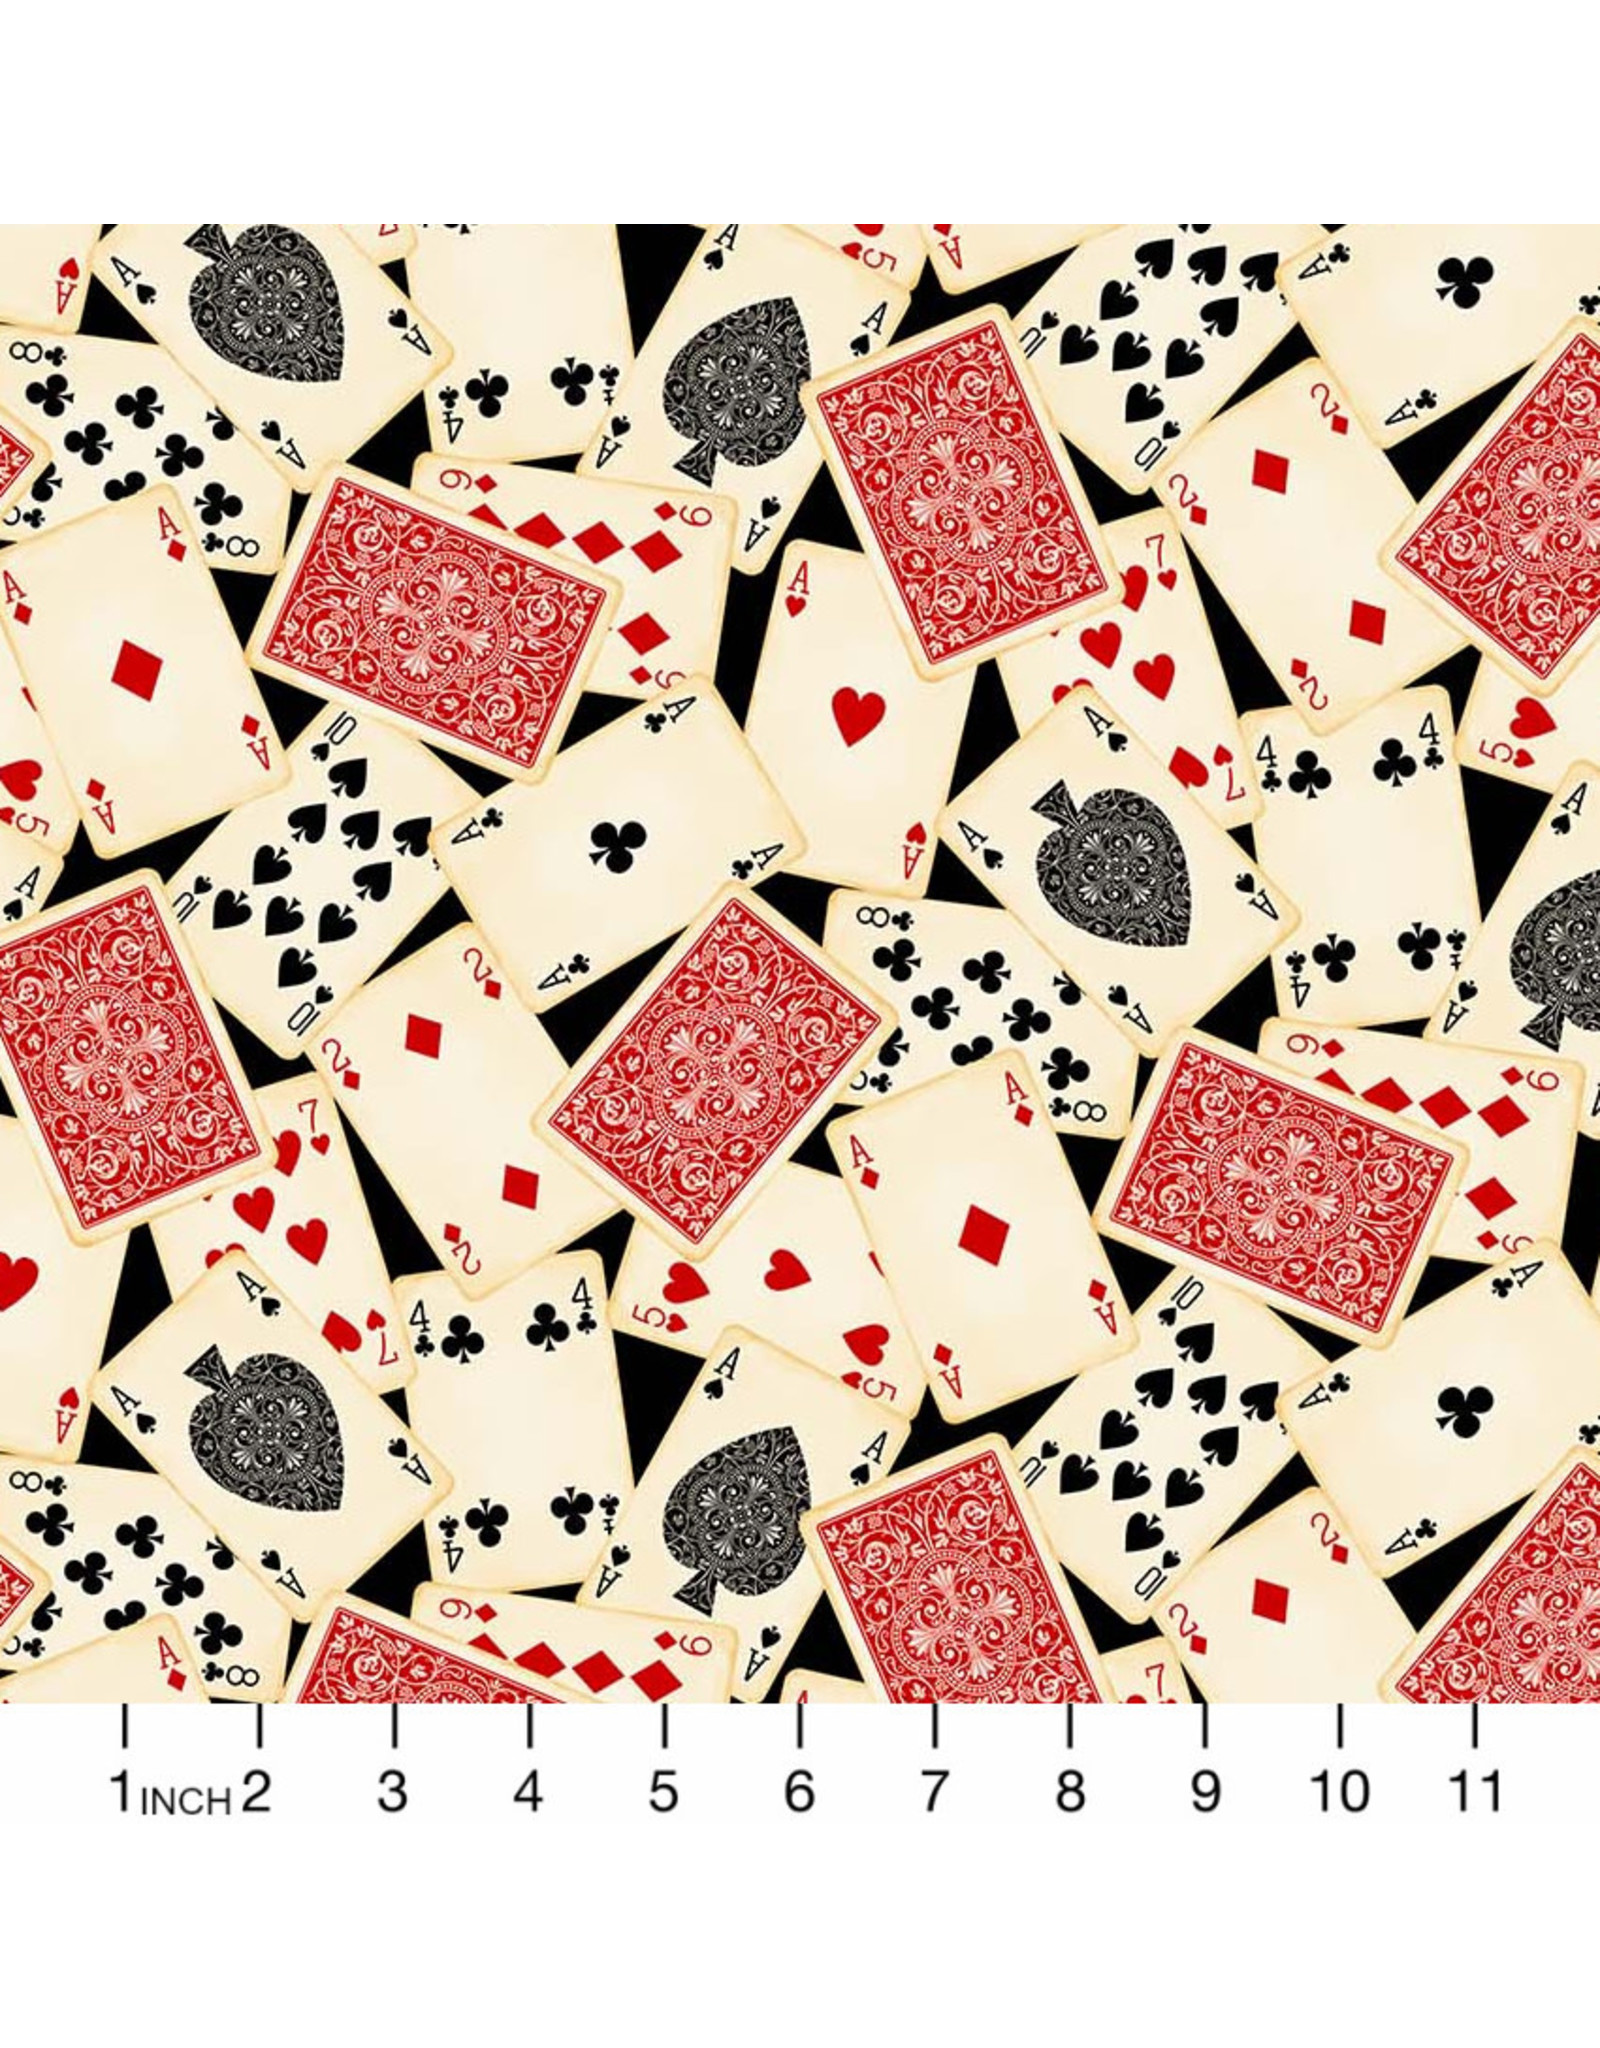 Northcott The Cave, Playing Cards in Black, Fabric Half-Yards